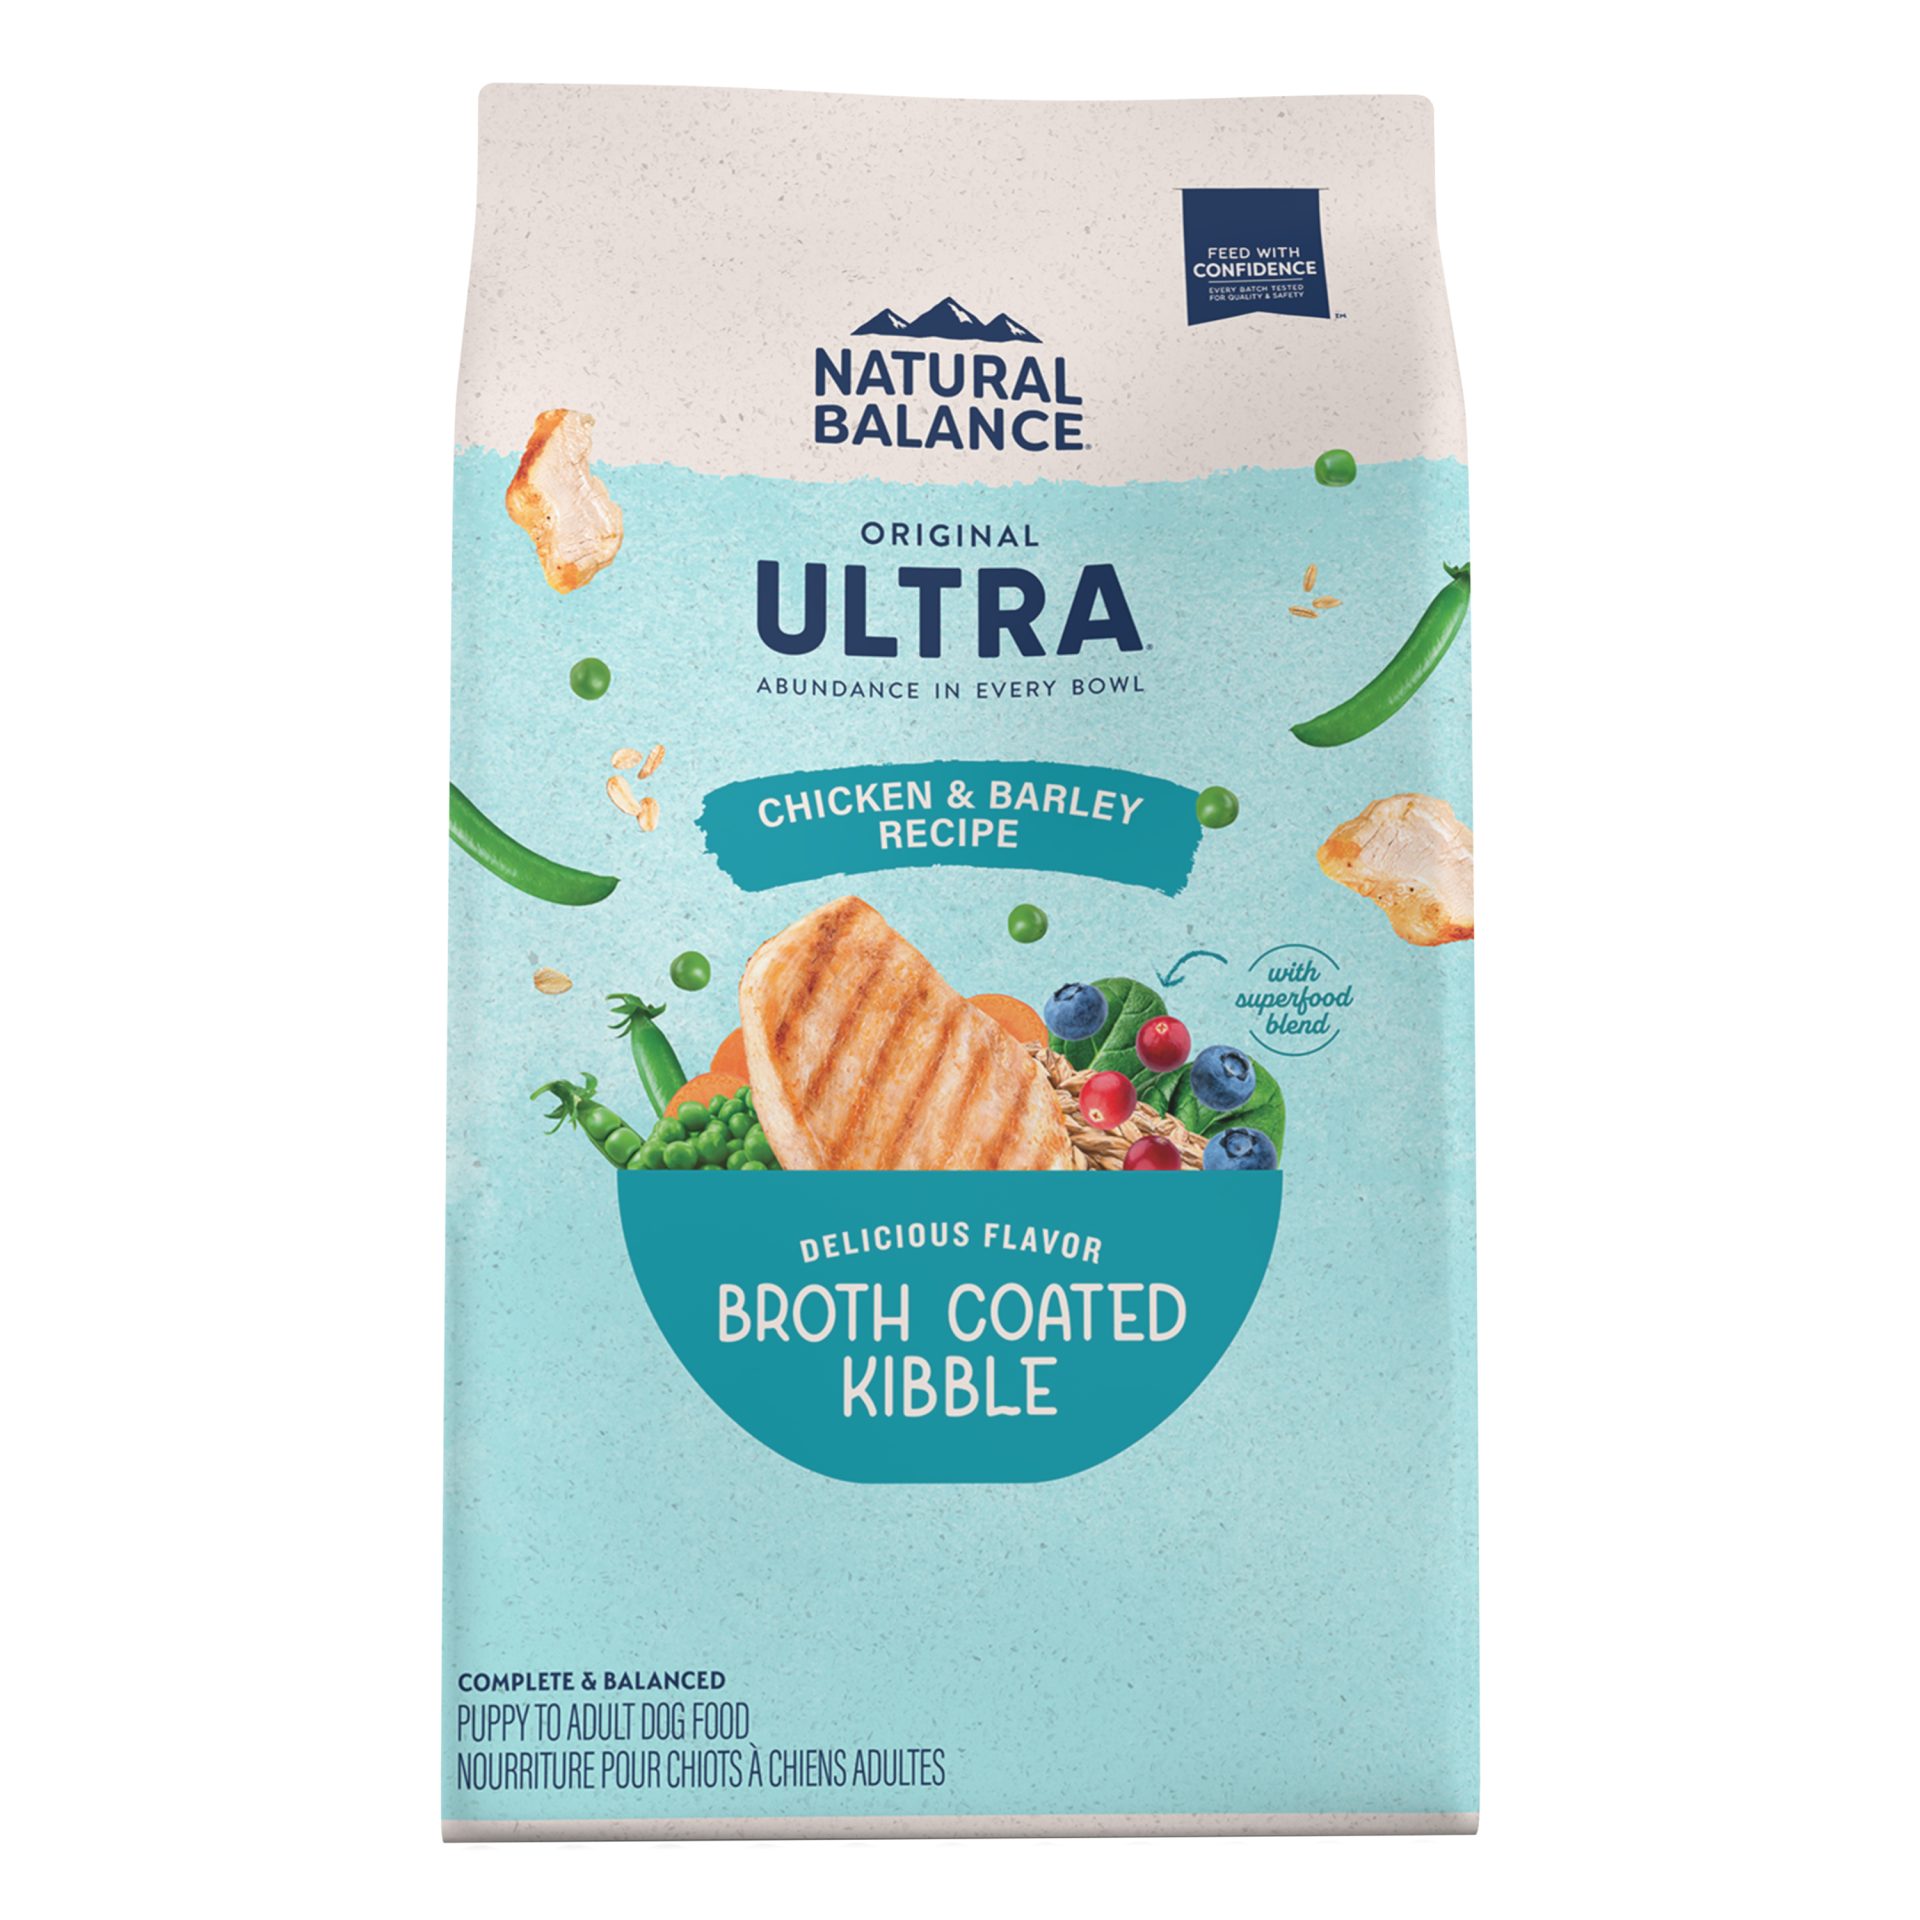 GREAT FOR ALL LIFE STAGES: ORGINAL ULTRA CHICKEN & BARLEY